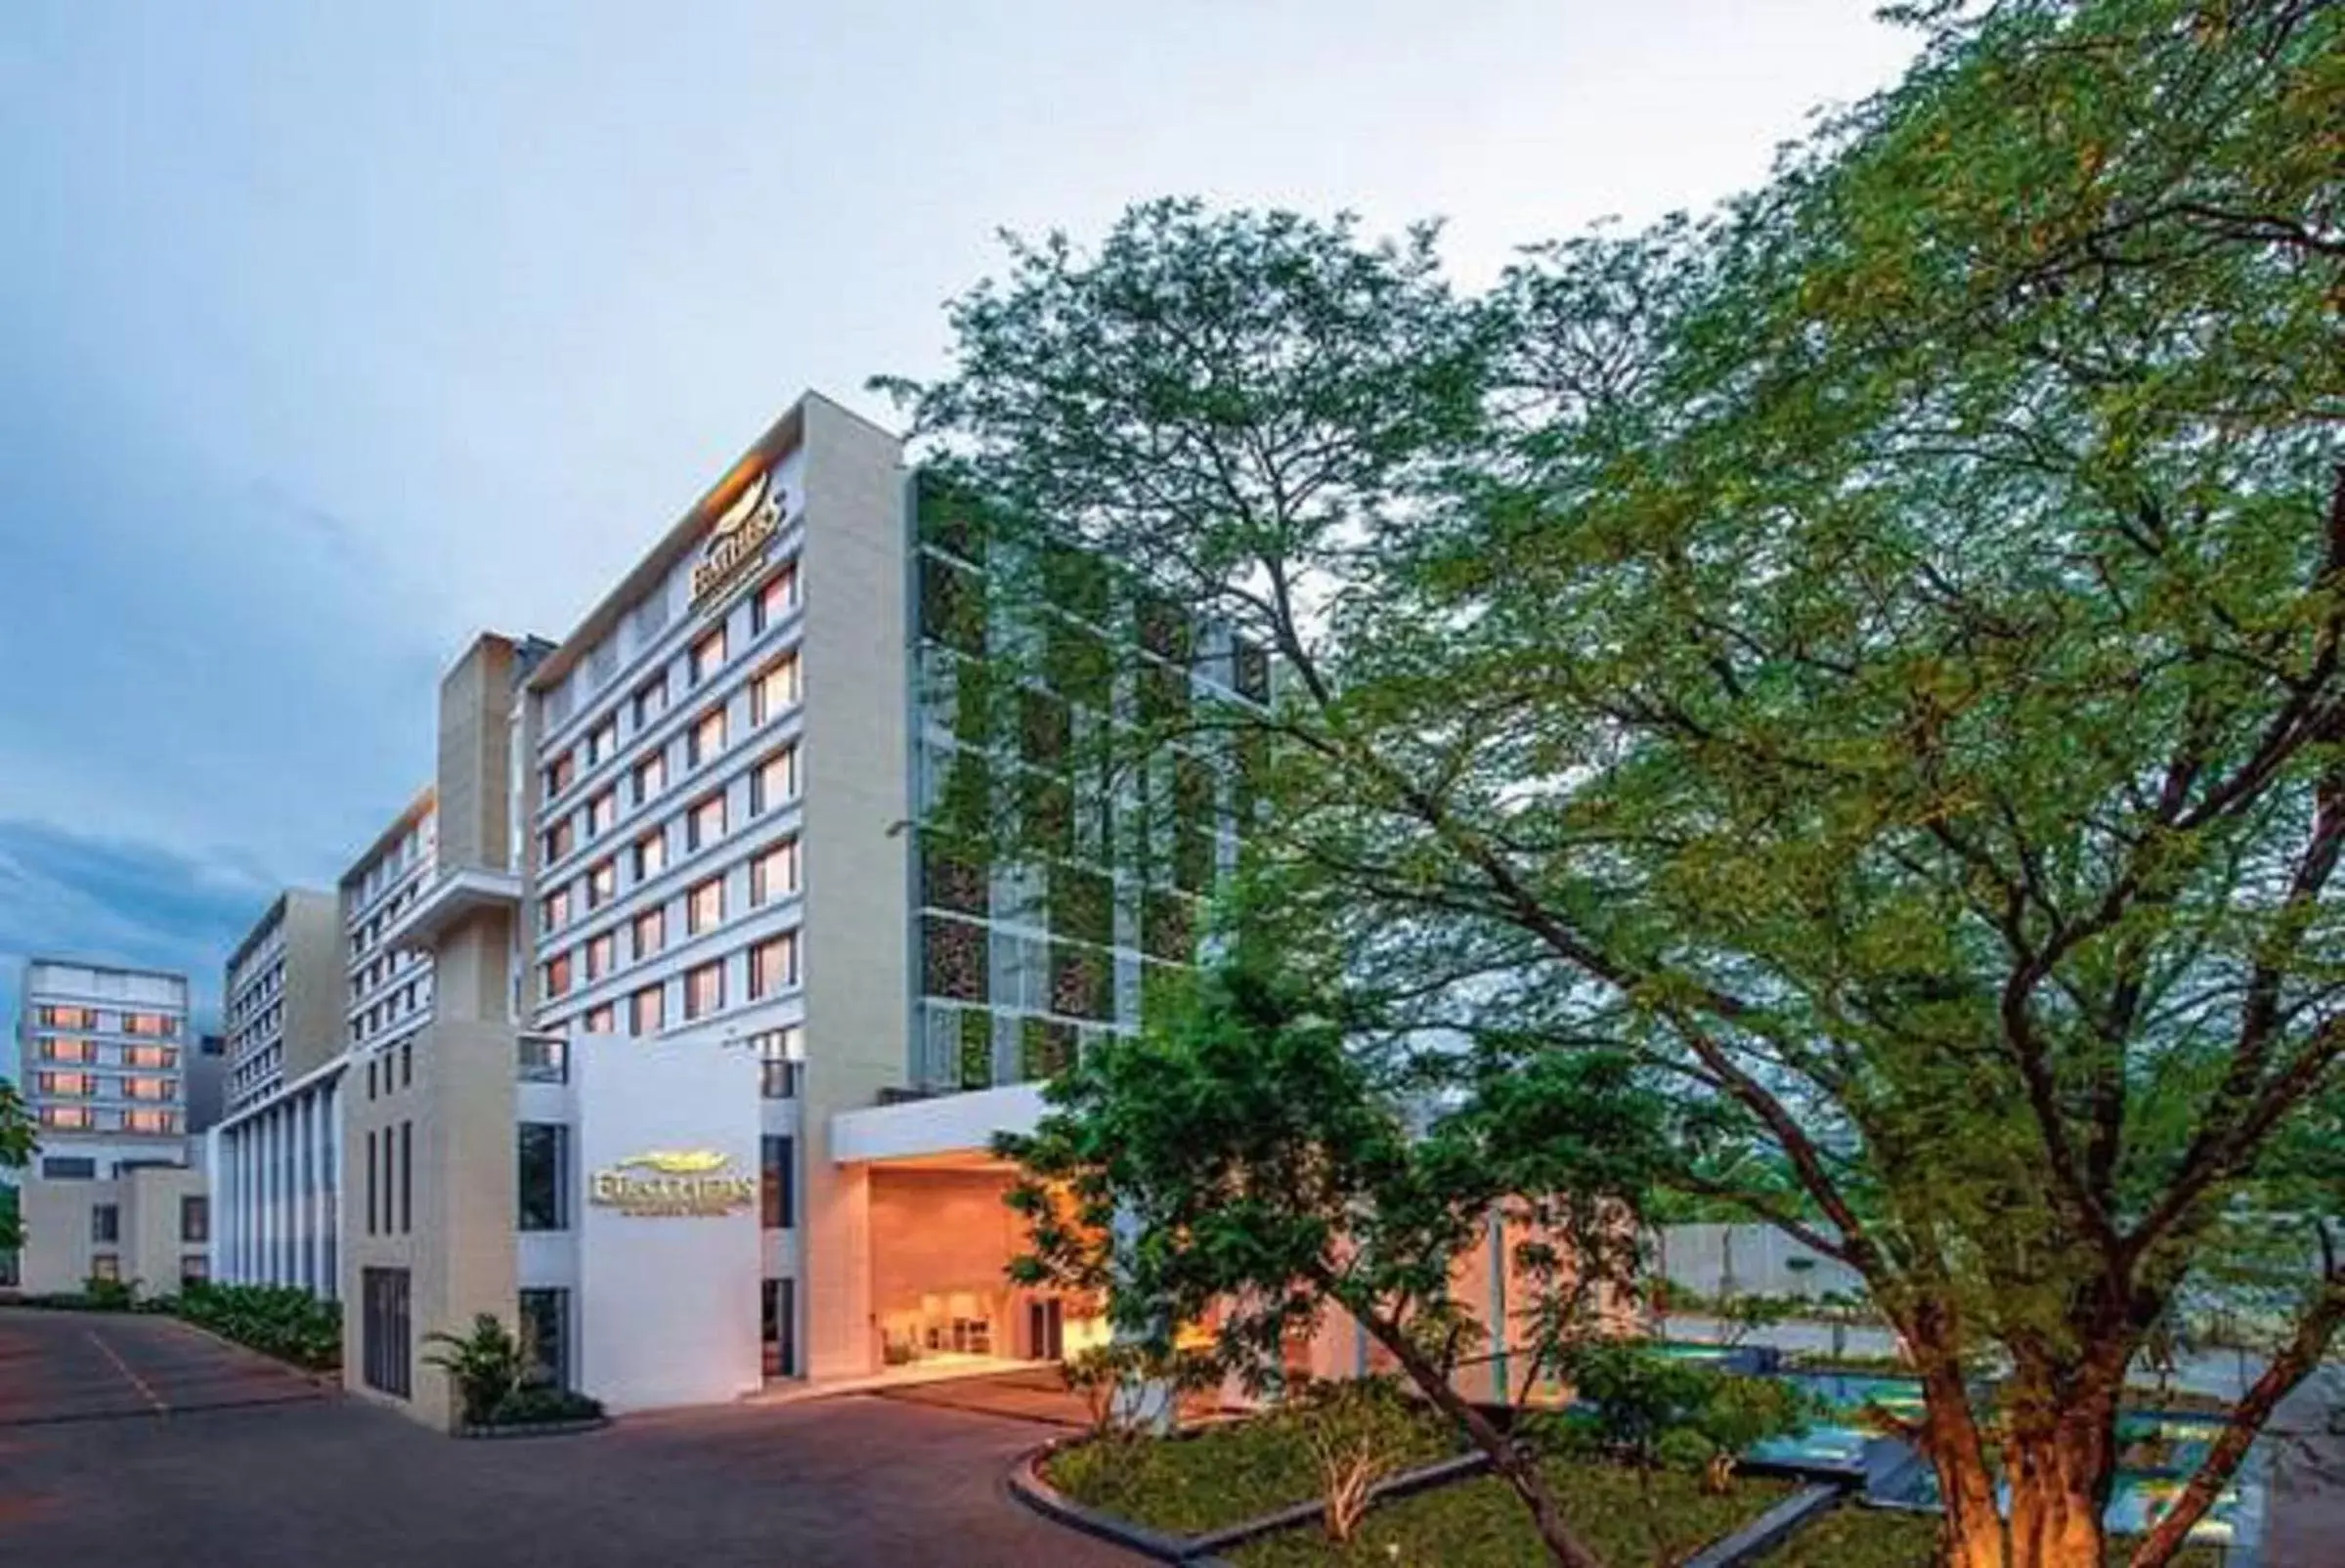 Property building in Feathers- A Radha Hotel, Chennai